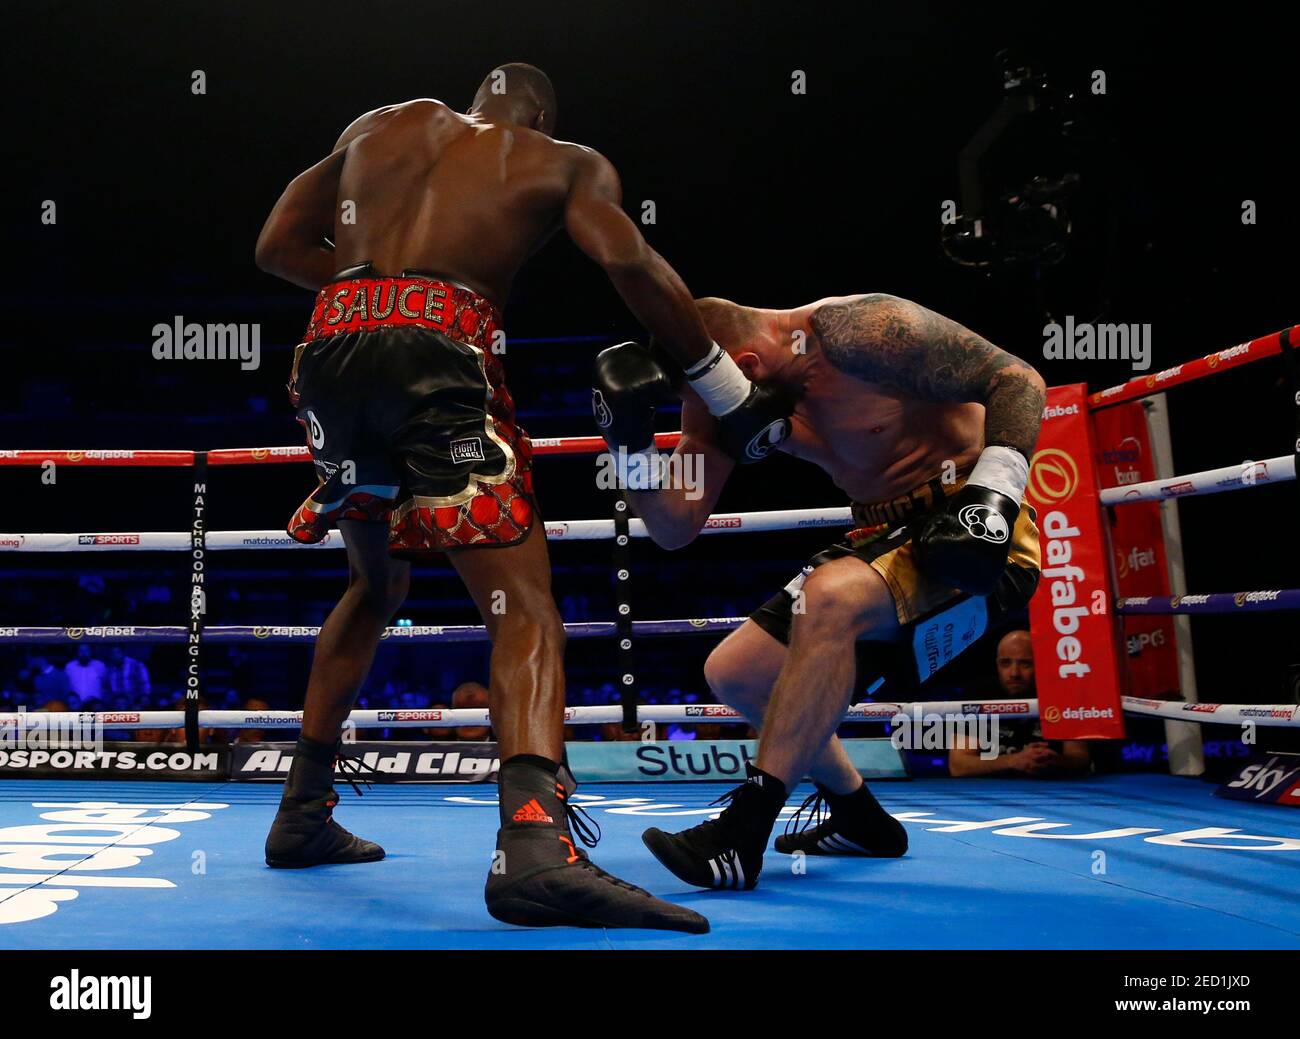 Britain Boxing - Lawrence Okolie v Lukas Rusiewicz - SSE Hydro, Glasgow,  Scotland - 15/4/17 Lawrence Okolie knocks down Lukas Rusiewicz Action  Images via Reuters / Peter Cziborra Livepic EDITORIAL USE ONLY Stock Photo  - Alamy